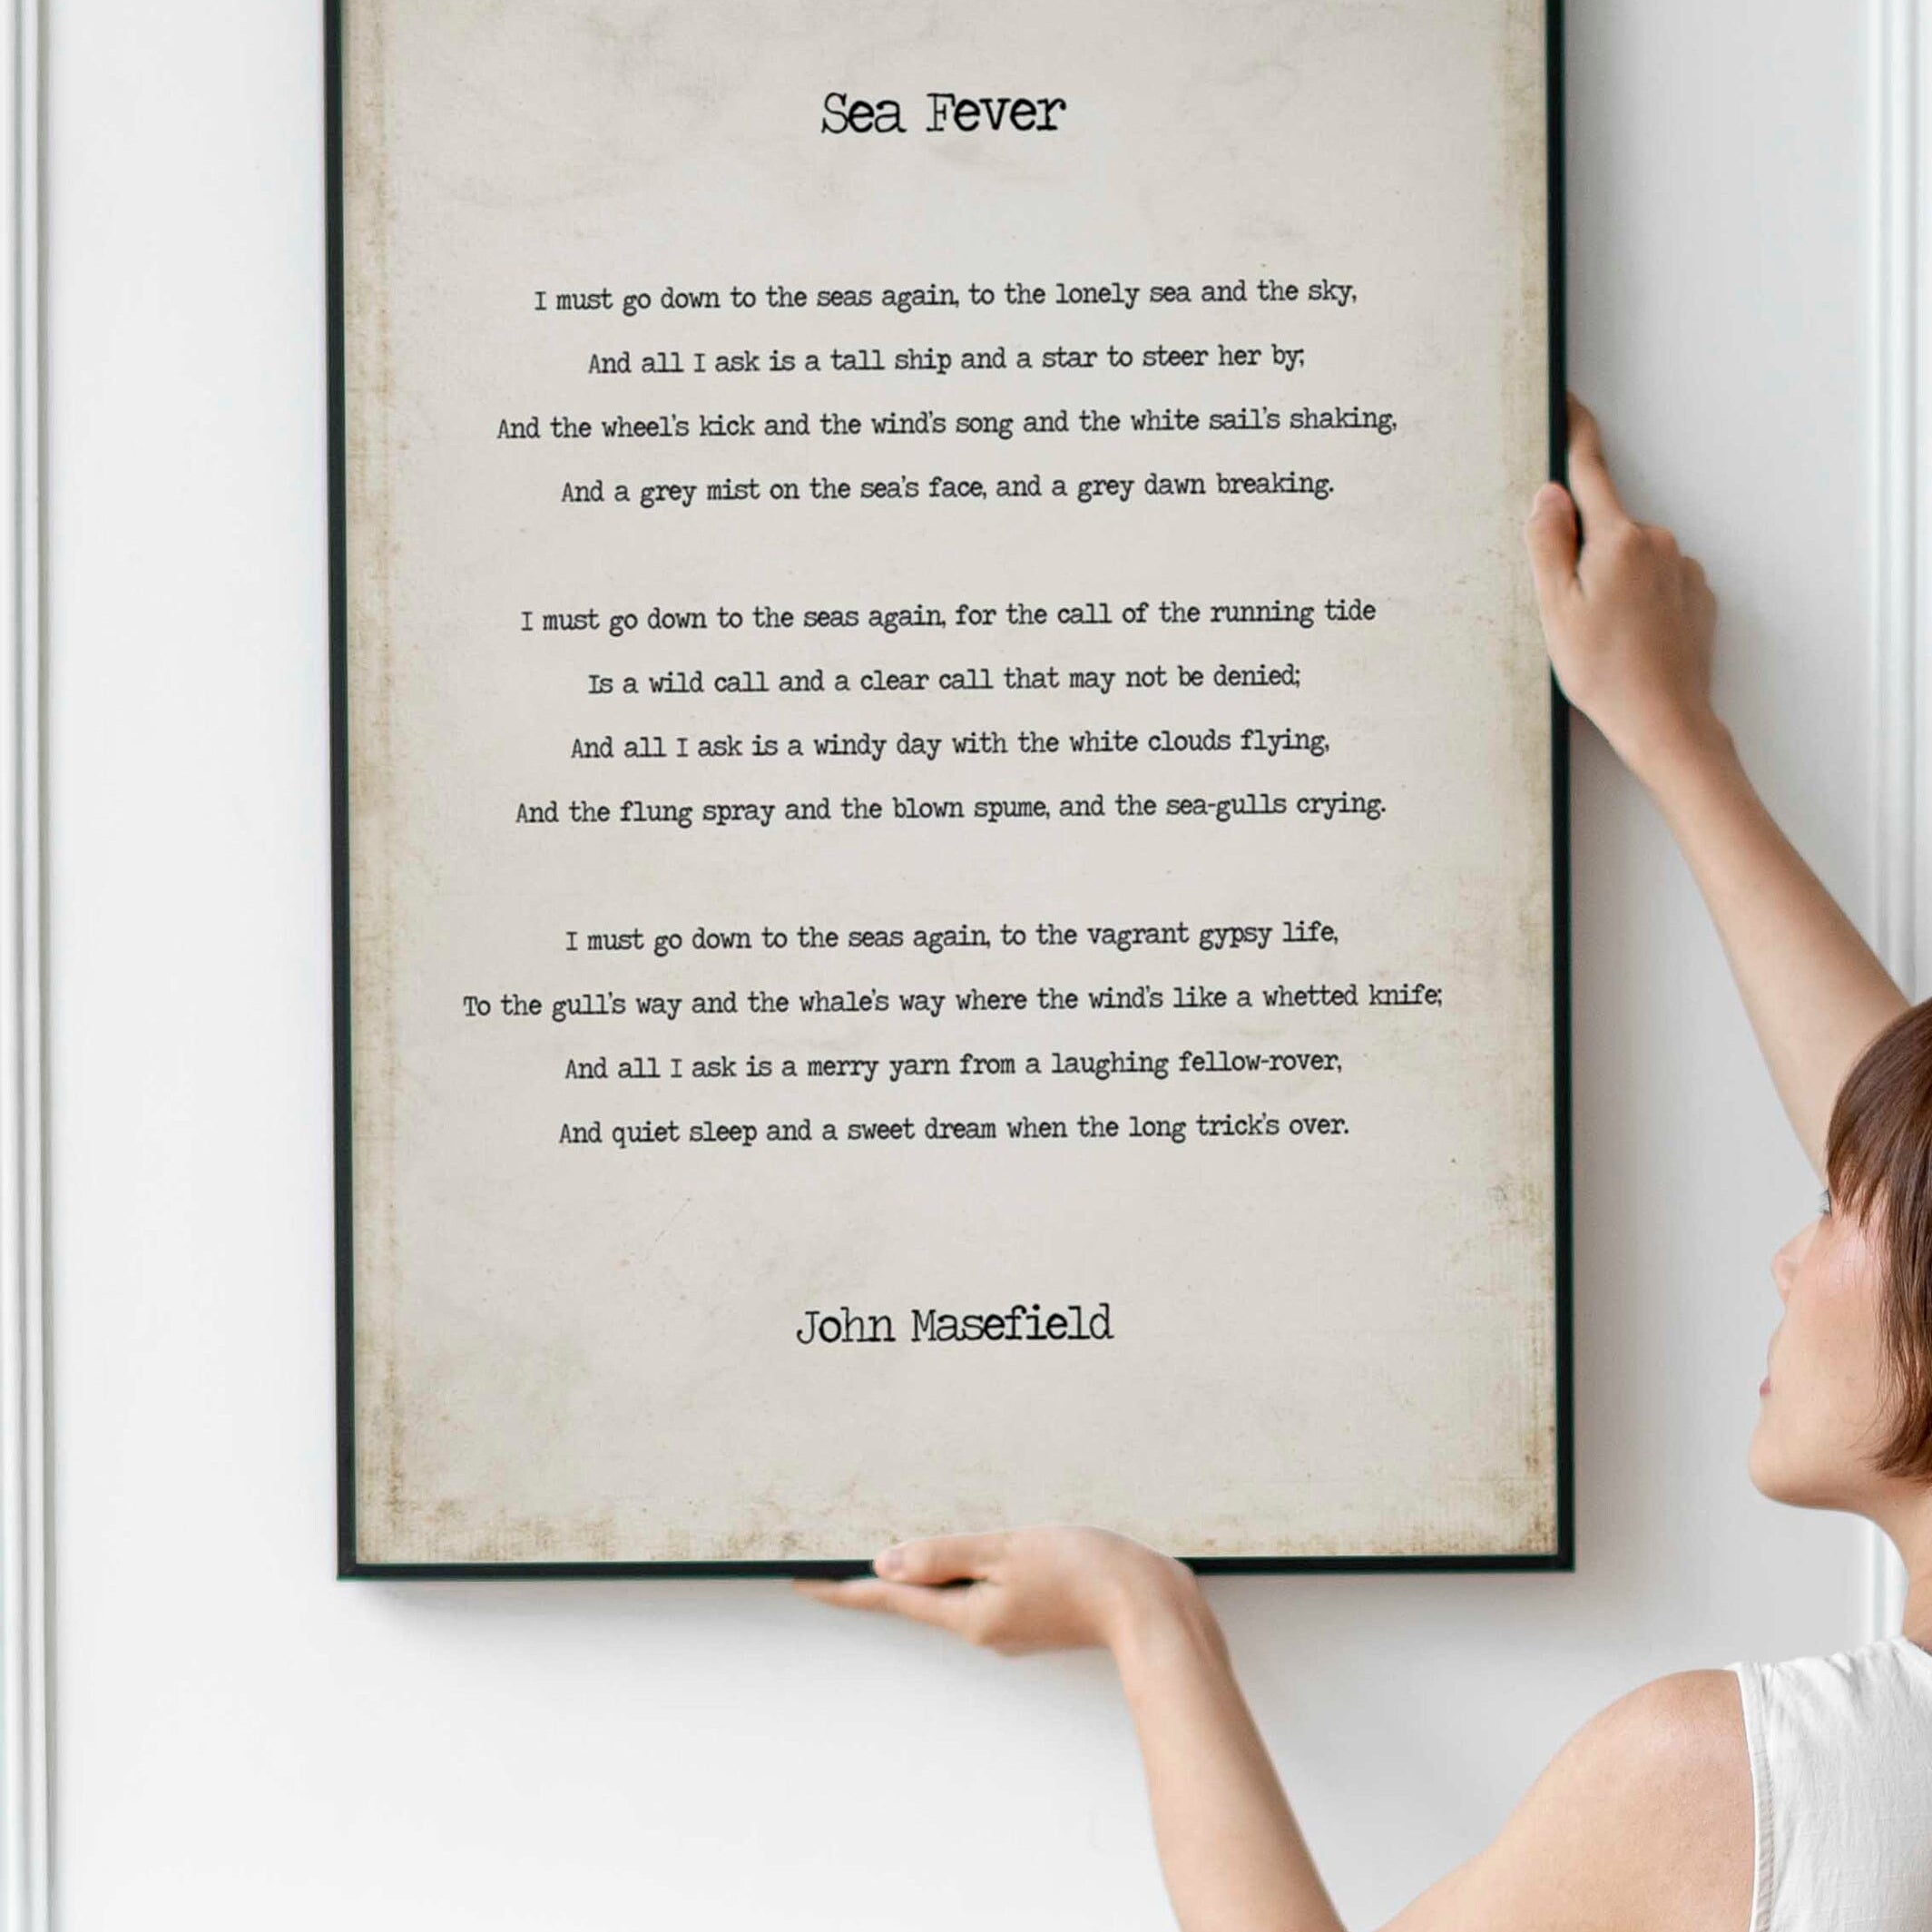 Sea Fever Poem by John Masefield, I Must Go Down To The Seas Again Poetry Art Print Literary Decor